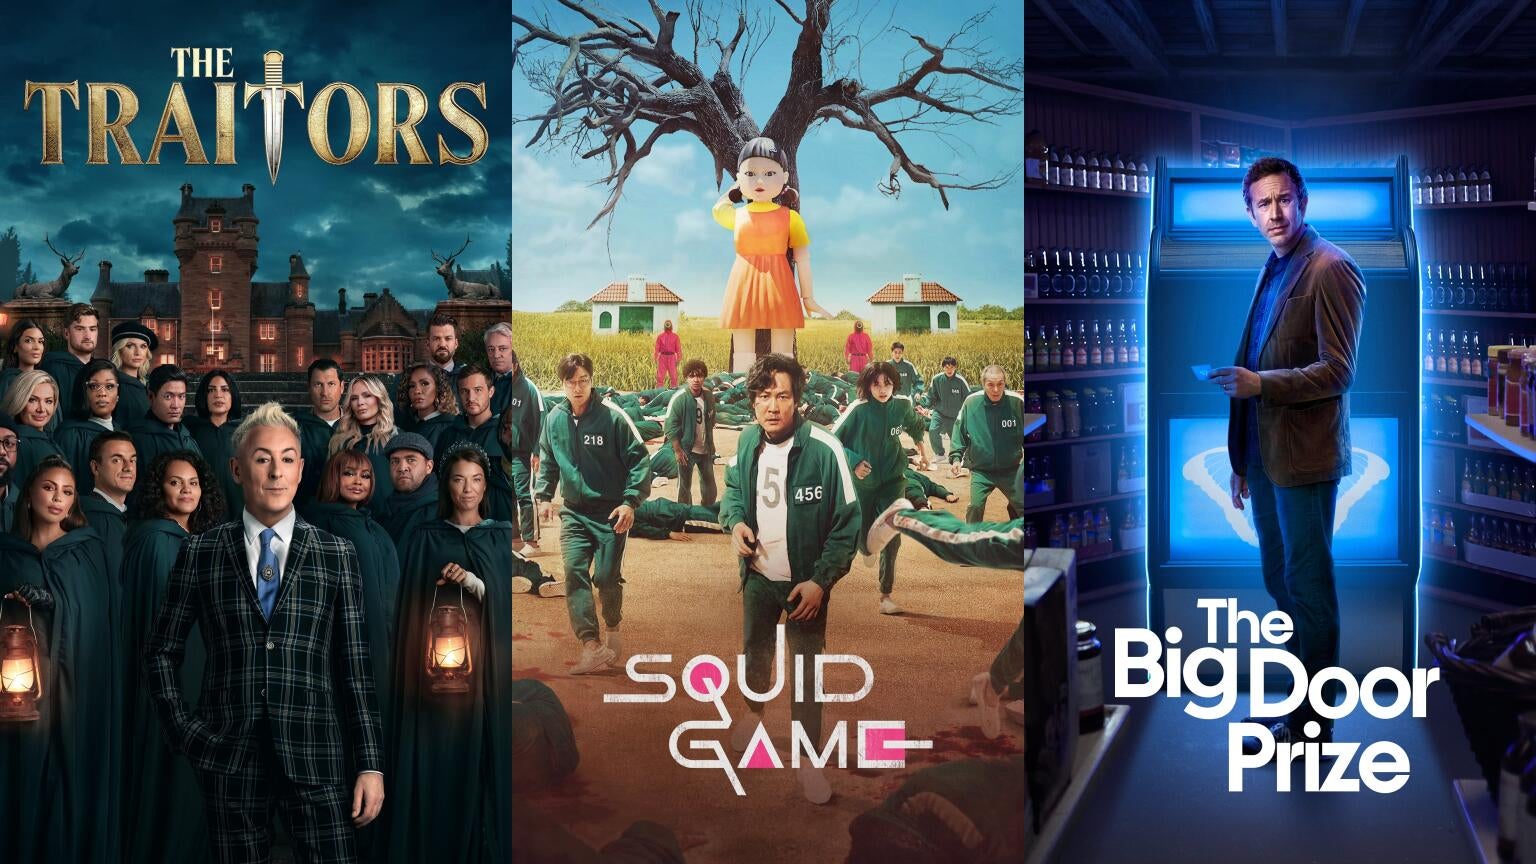 Posters for Peacock's "The Traitors," Netflix's "Squid Game," and Apple TV+'s "The Big Door Prize"